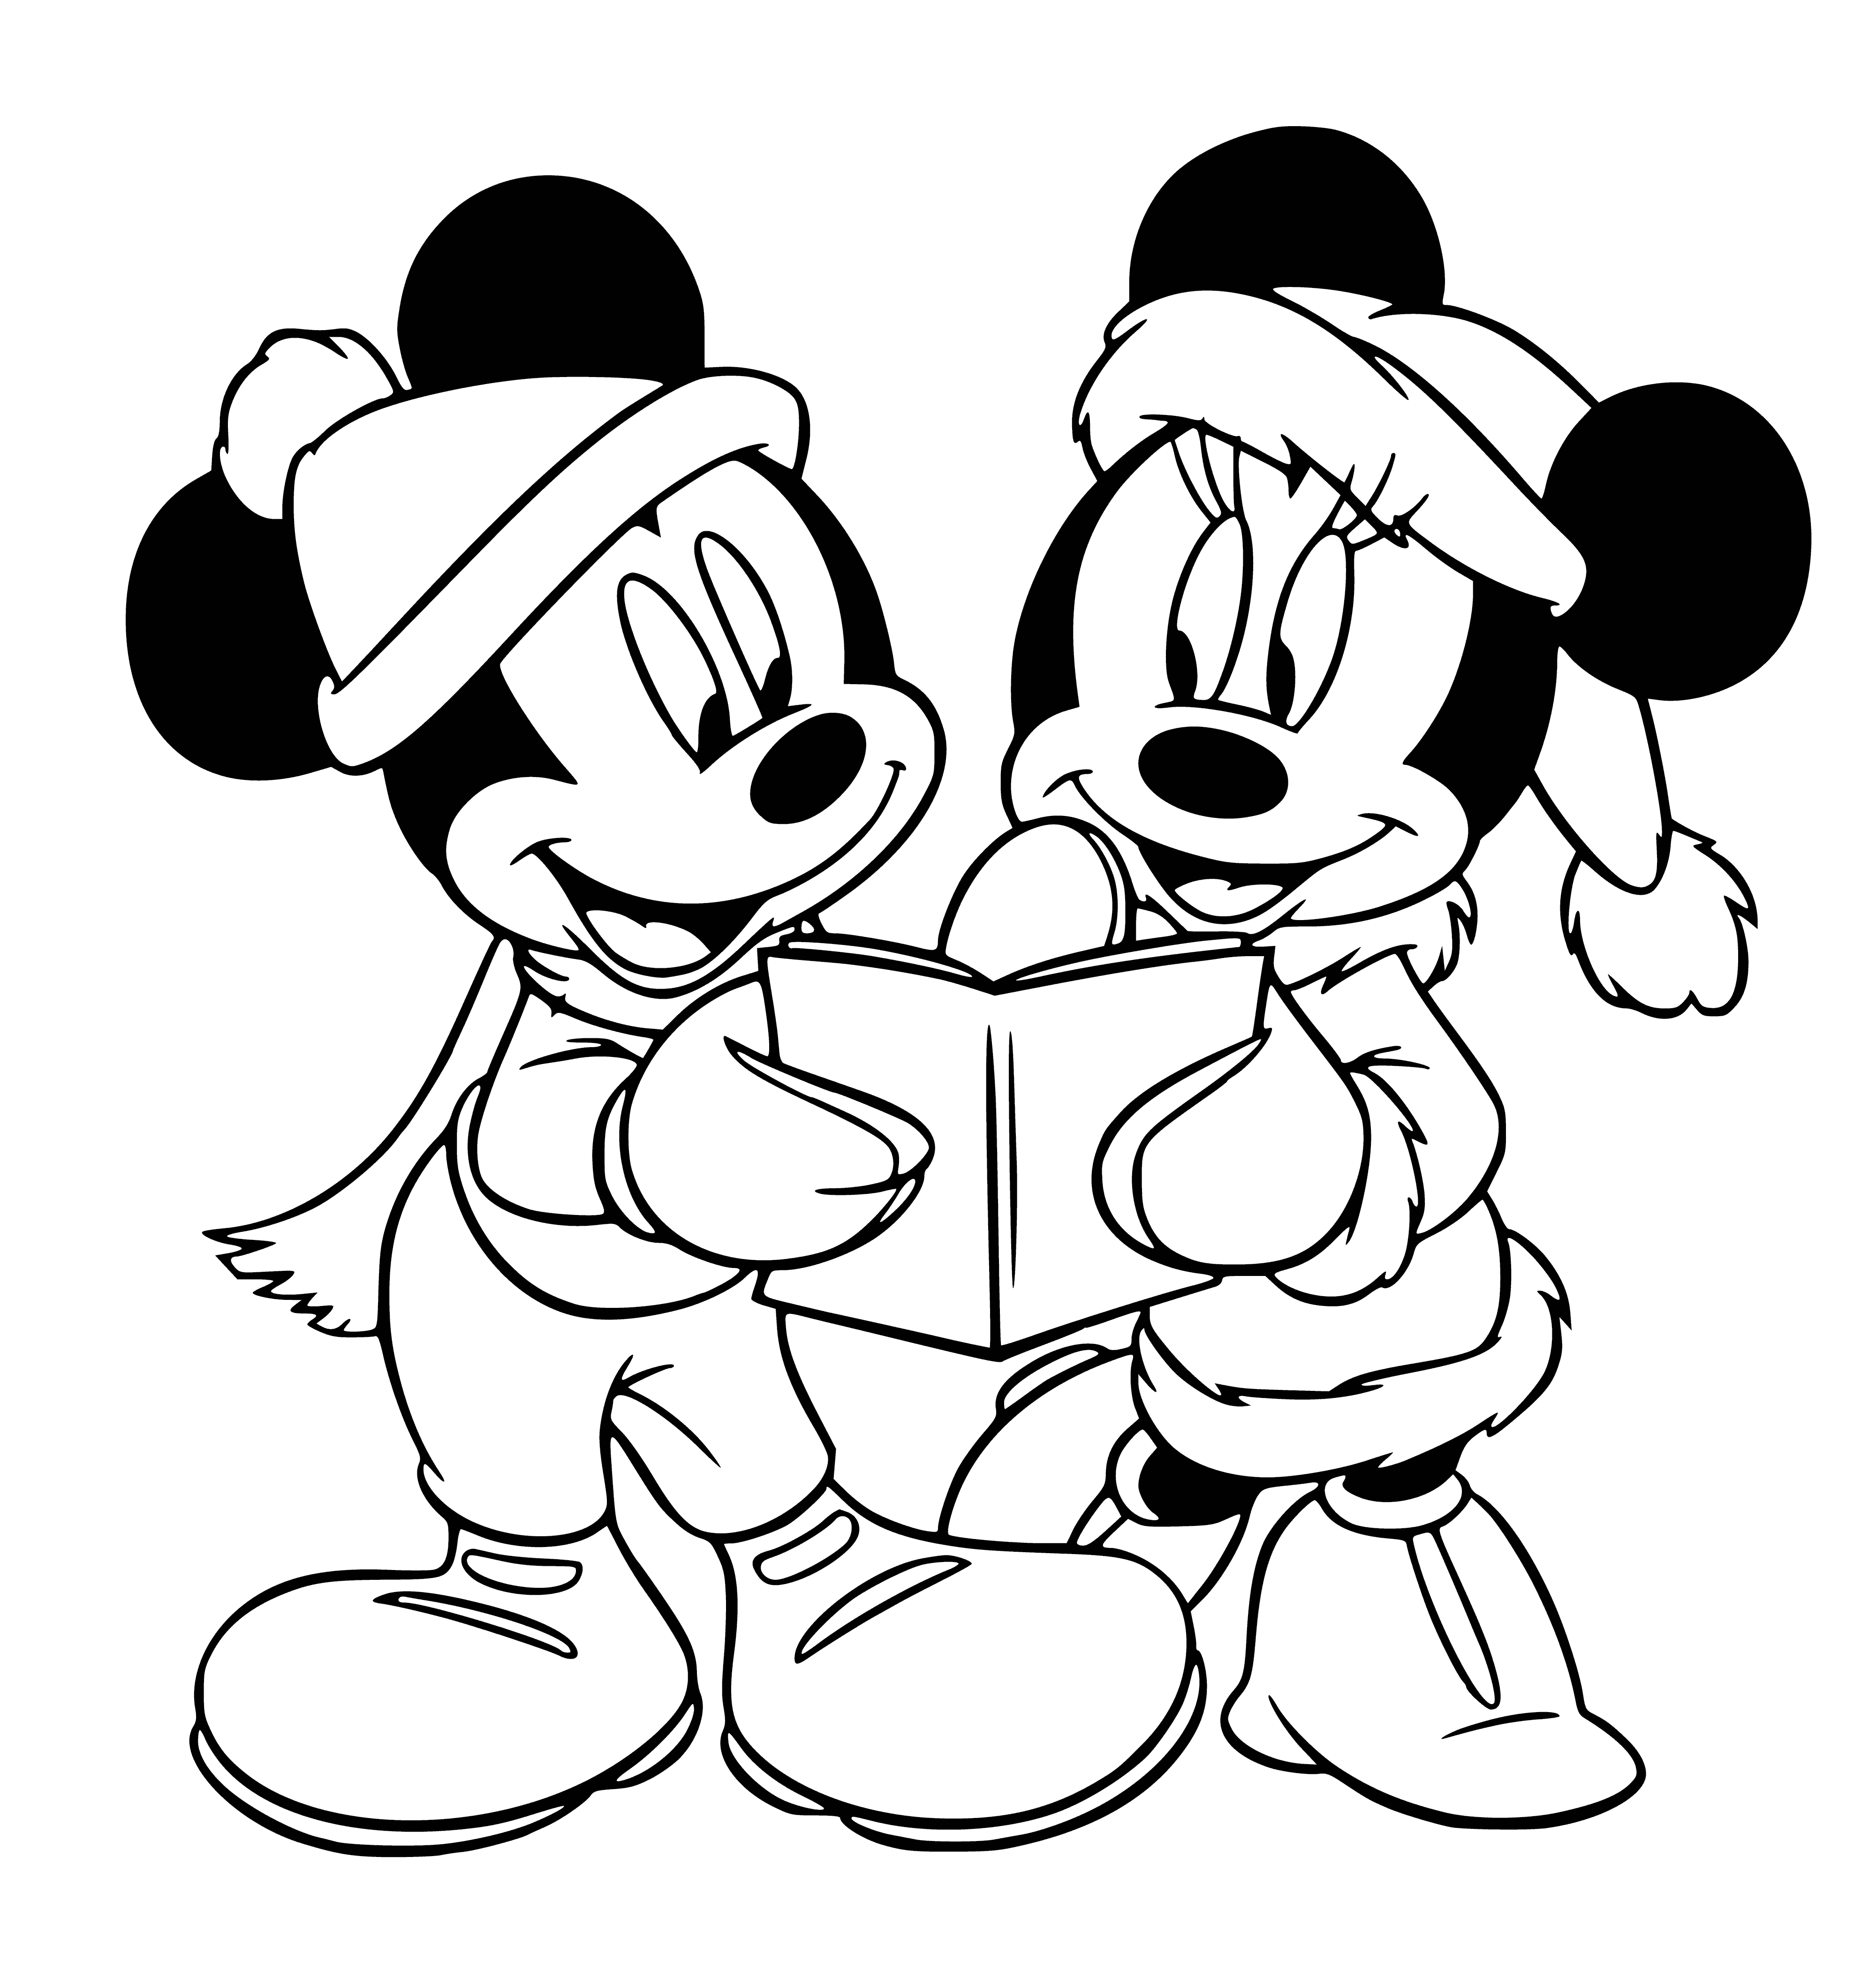 Mini and Mickey Mouse are celebrating the New Year with festive hats and noisemakers- filled with joy and excitement!